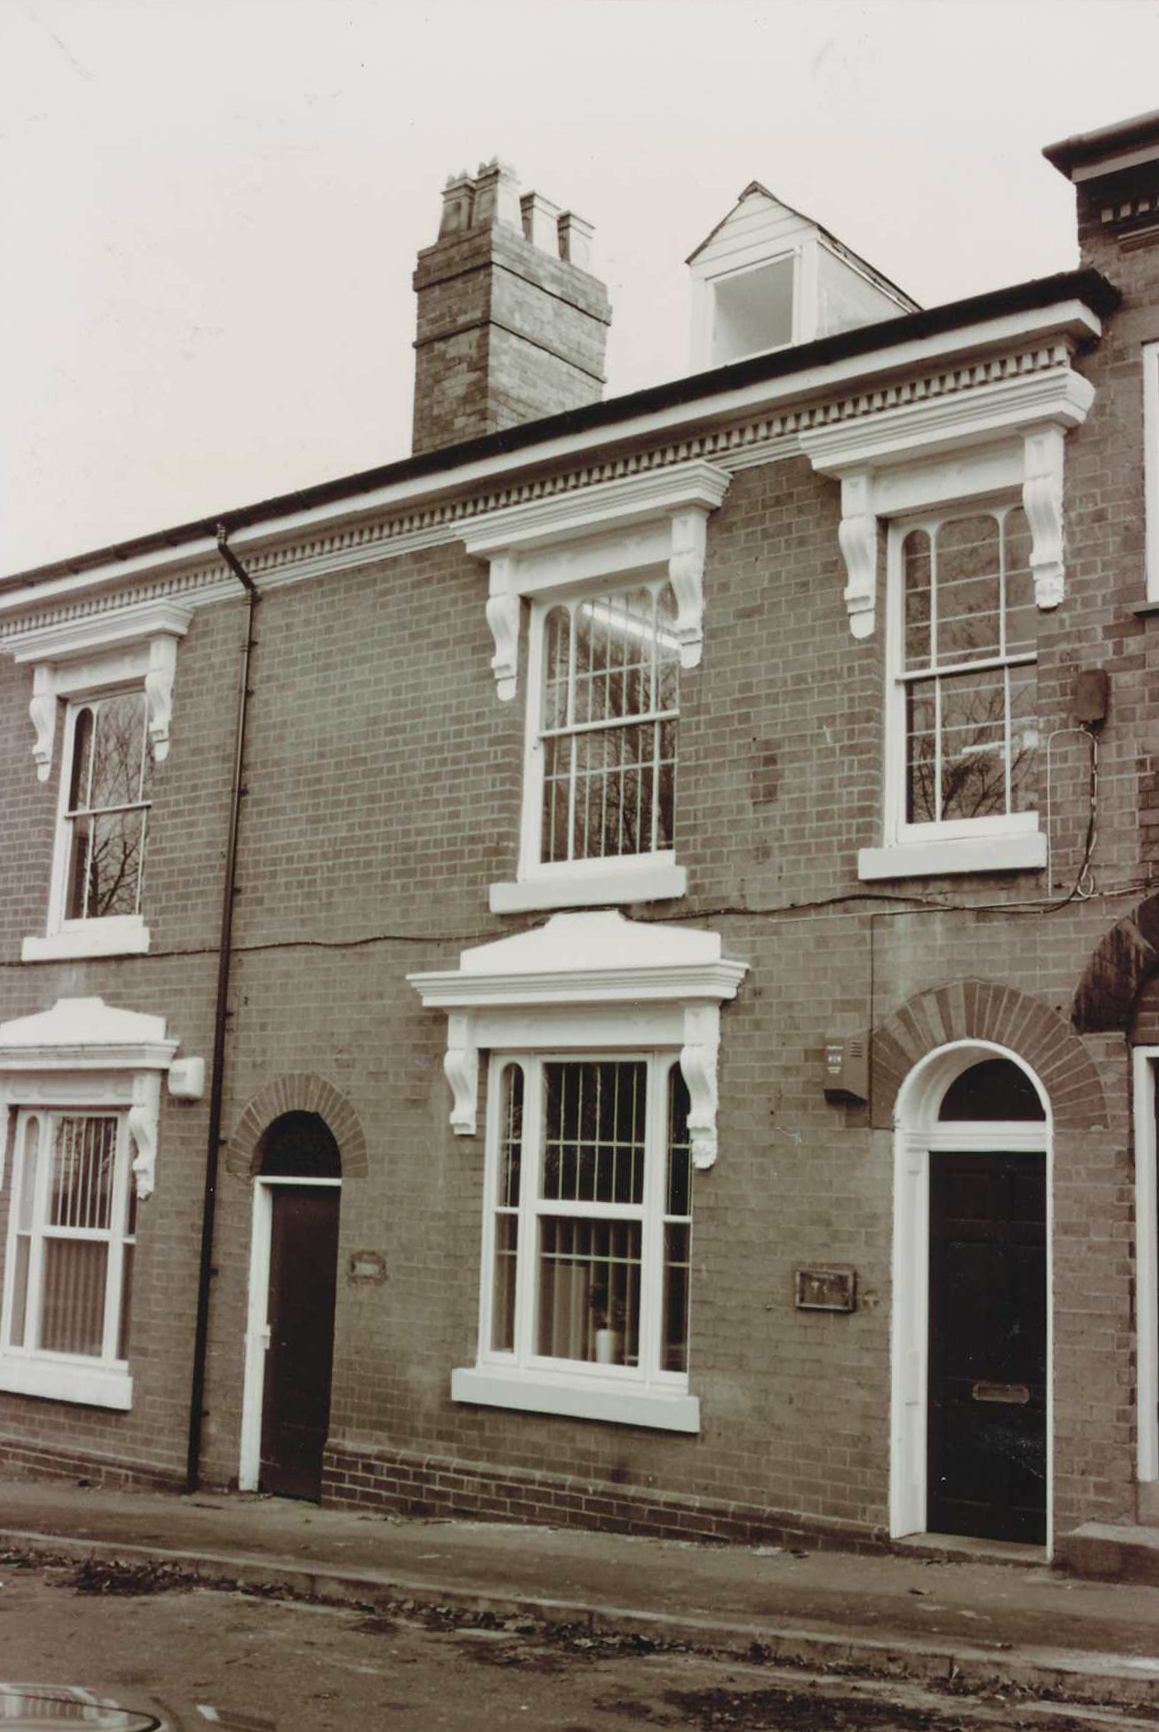 The handprint building in Keyhill Drive, Hockley.